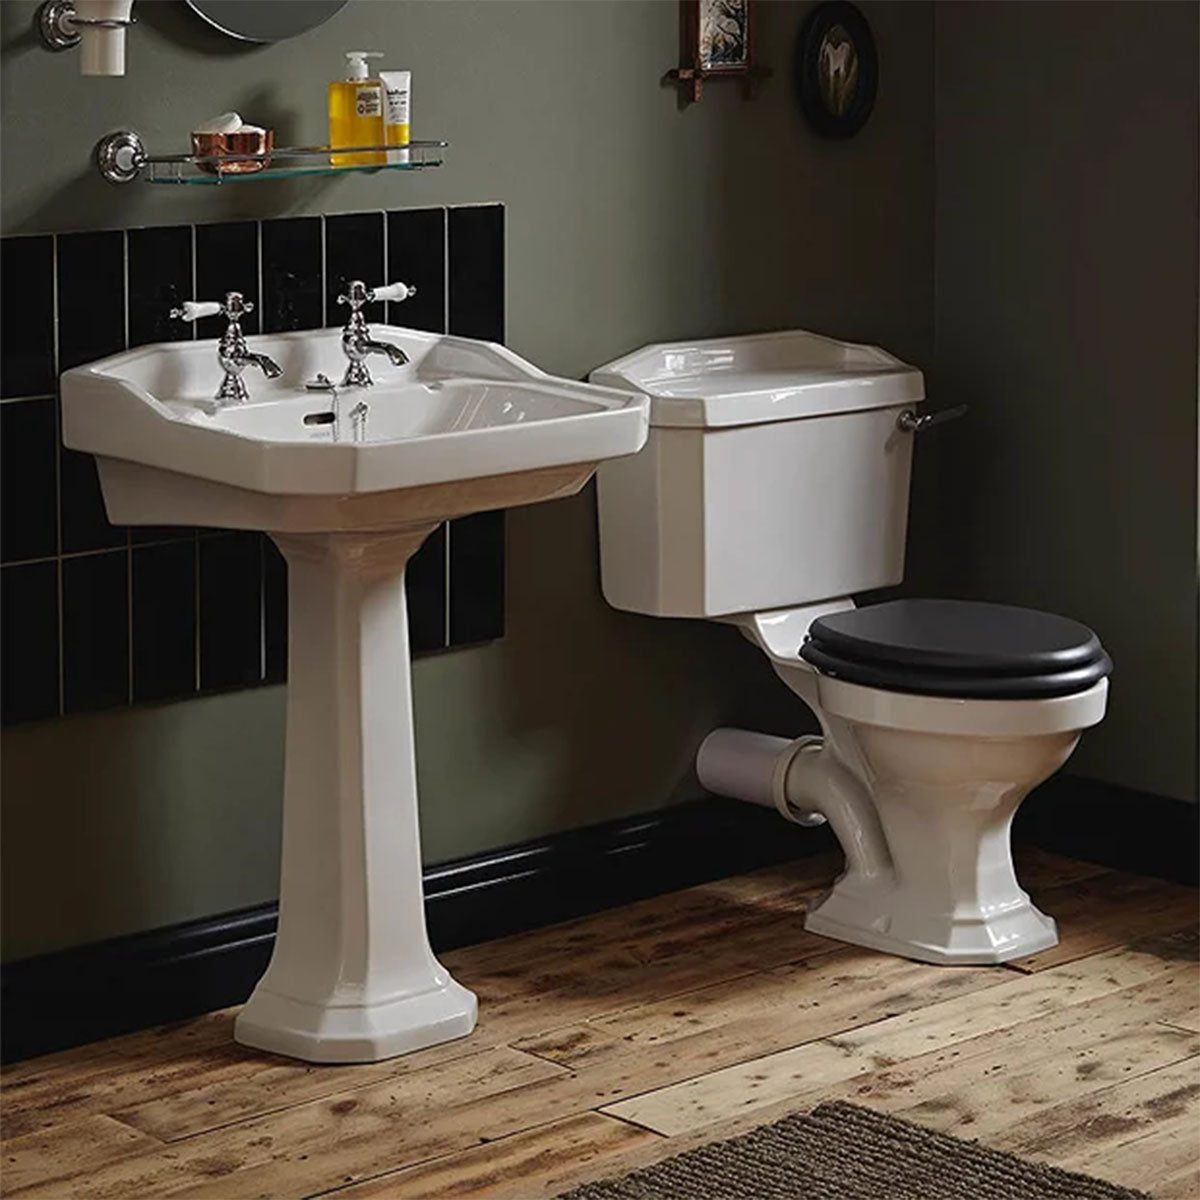 heritage granley standard close coupled toilet lifestyle